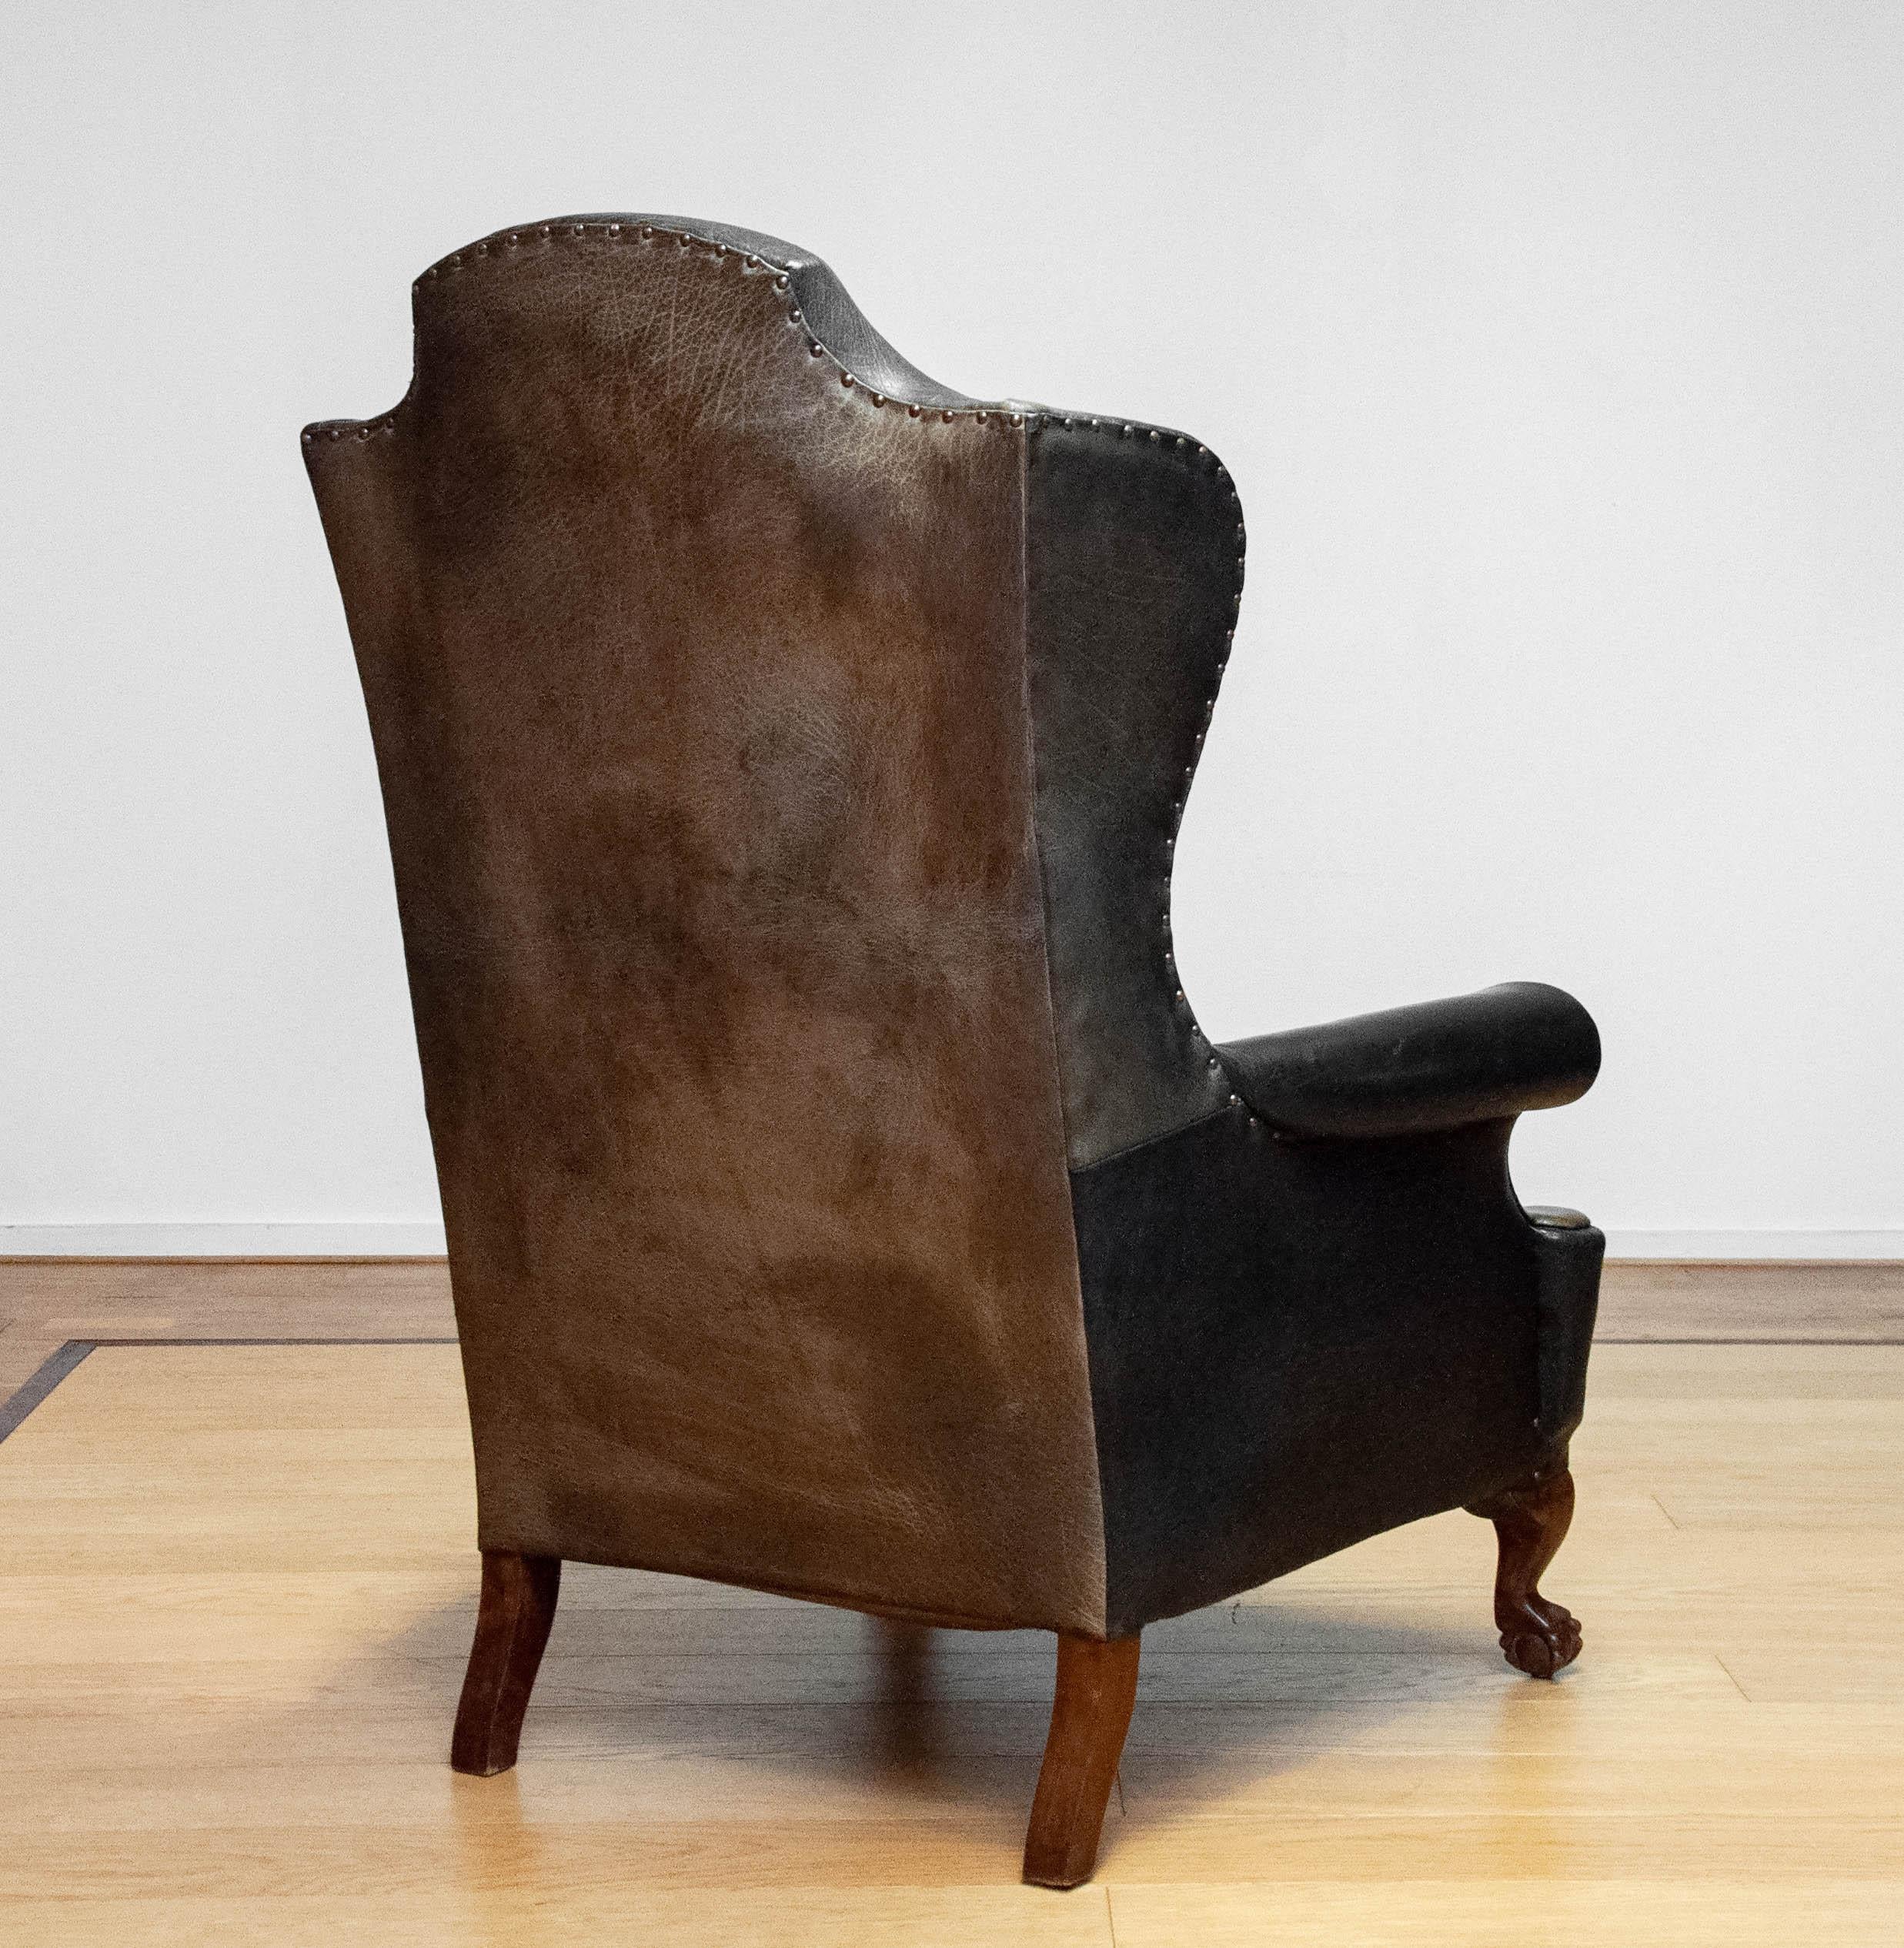 19th Century Black Leather Chippendale Wingback Chair With Claw And Ball Feet For Sale 3